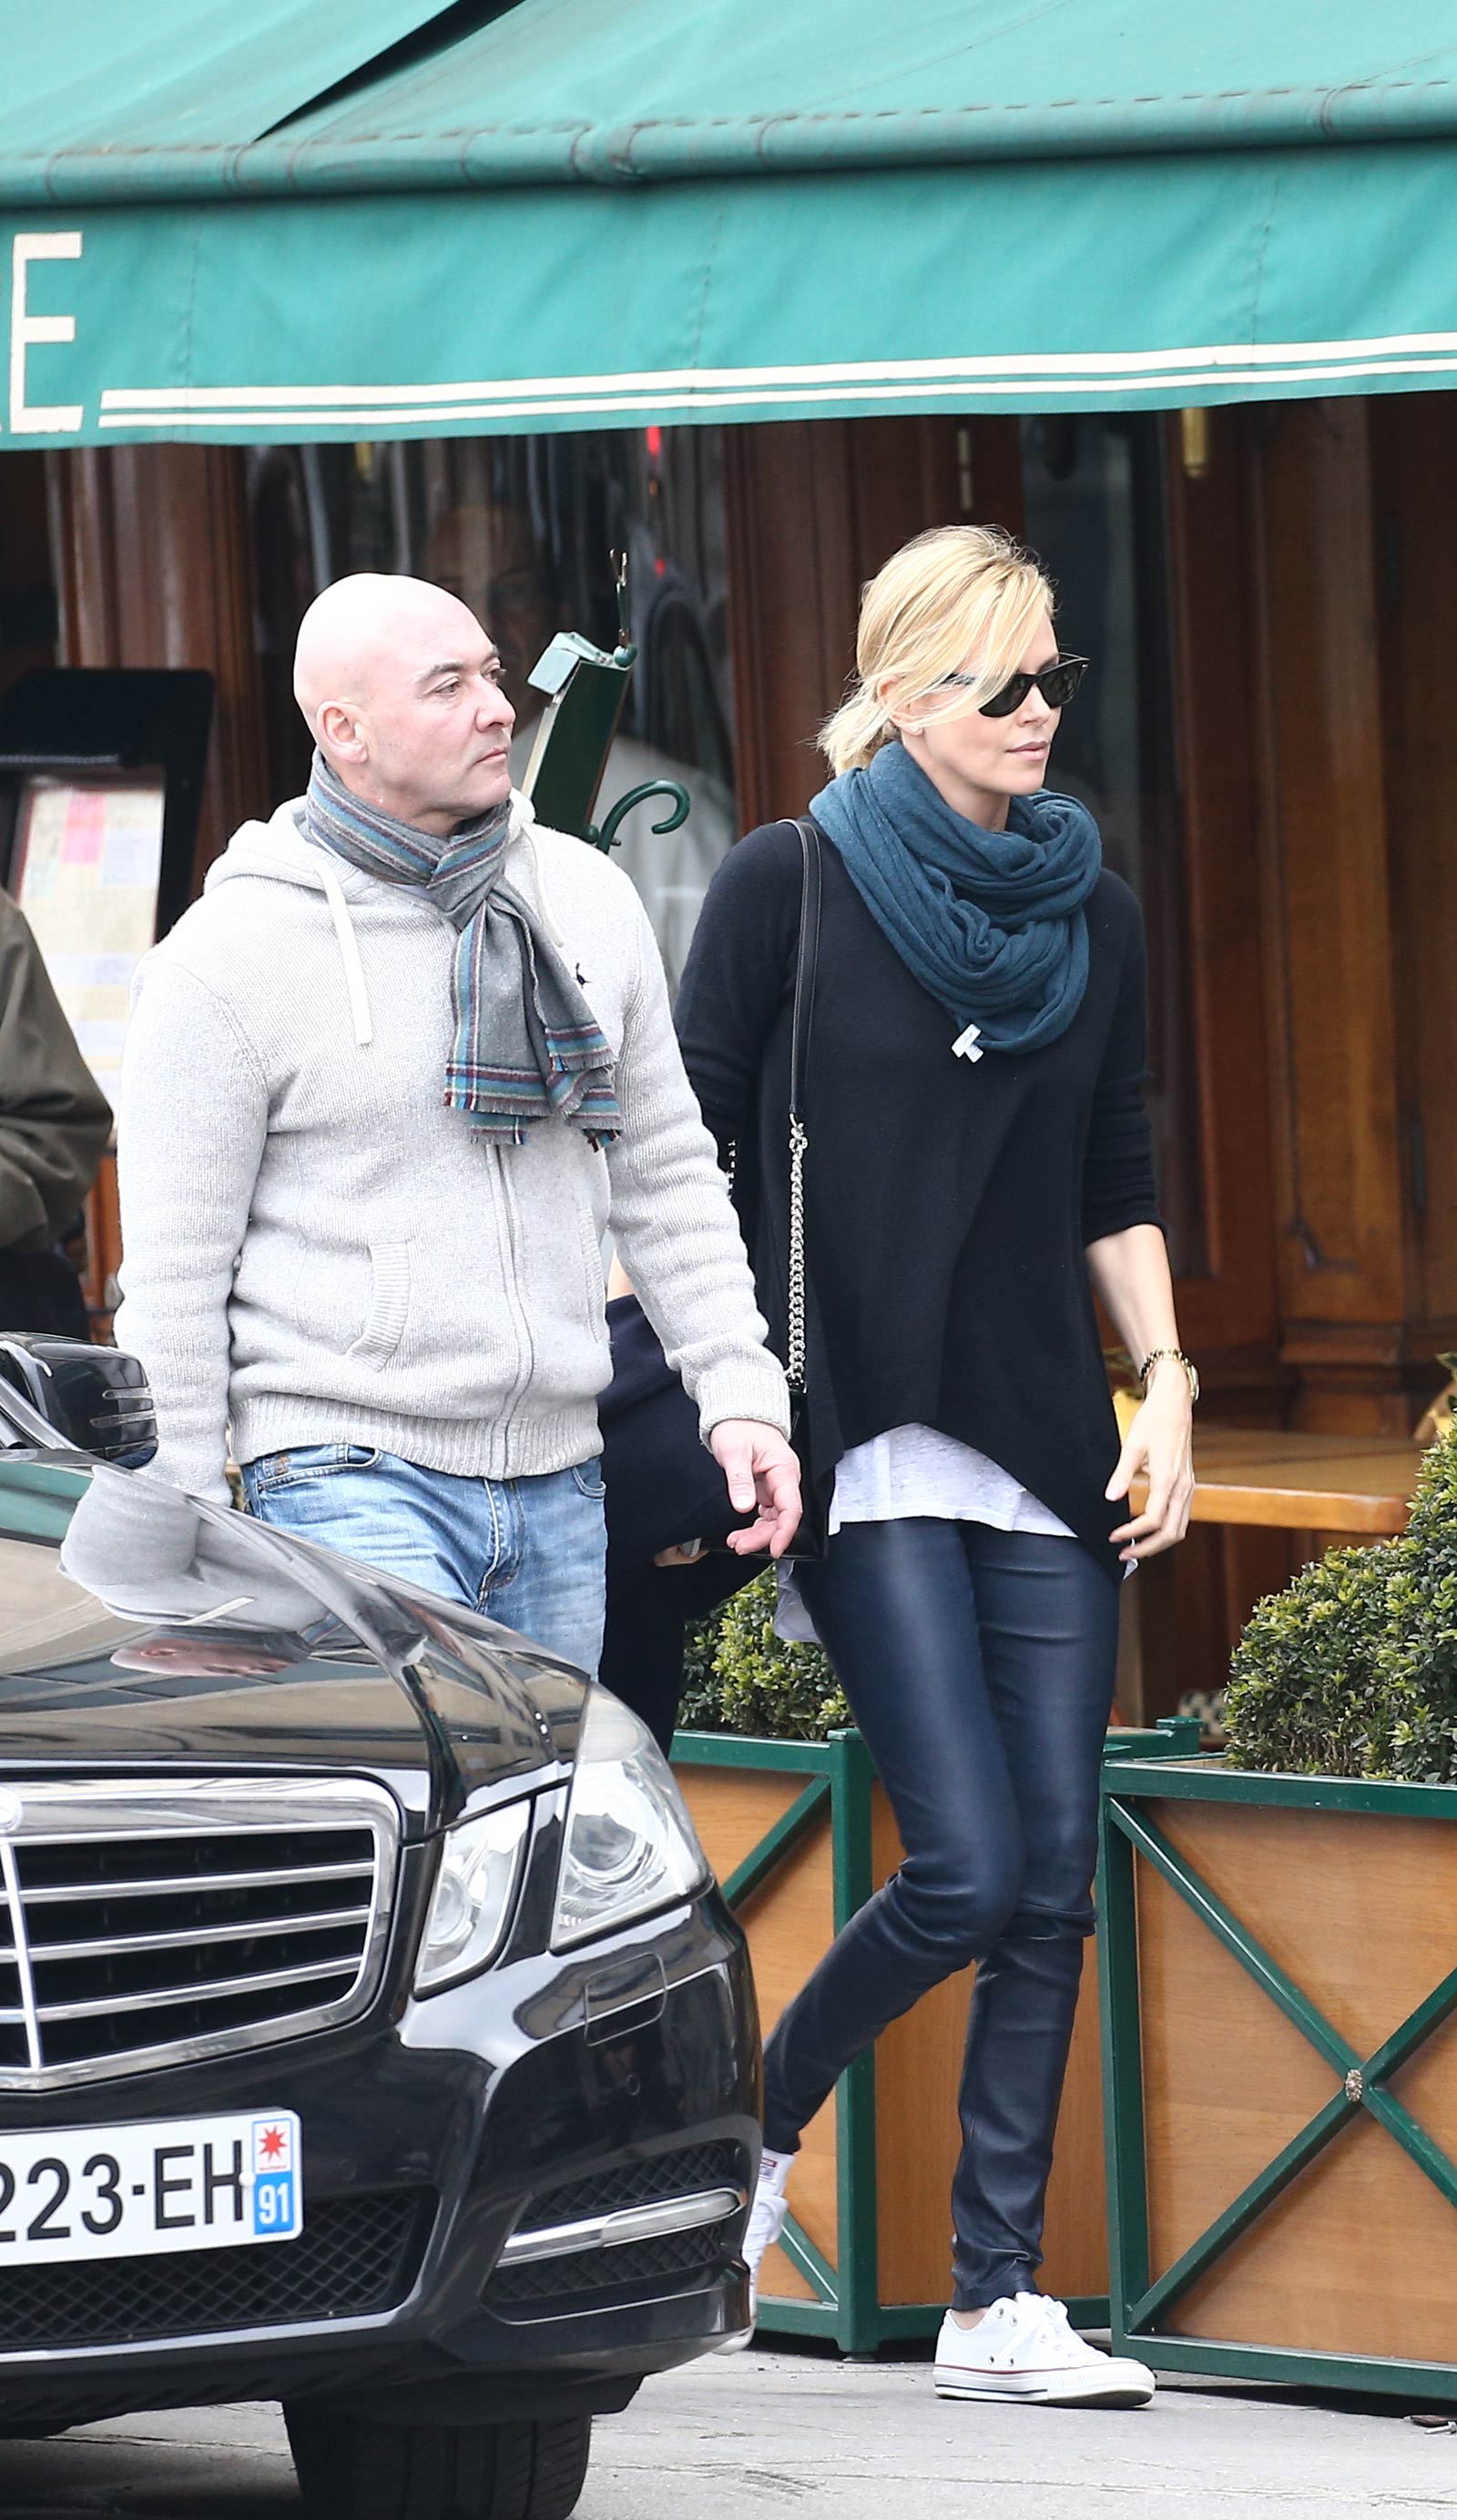 Charlize Theron at Le Voltaire restaurant